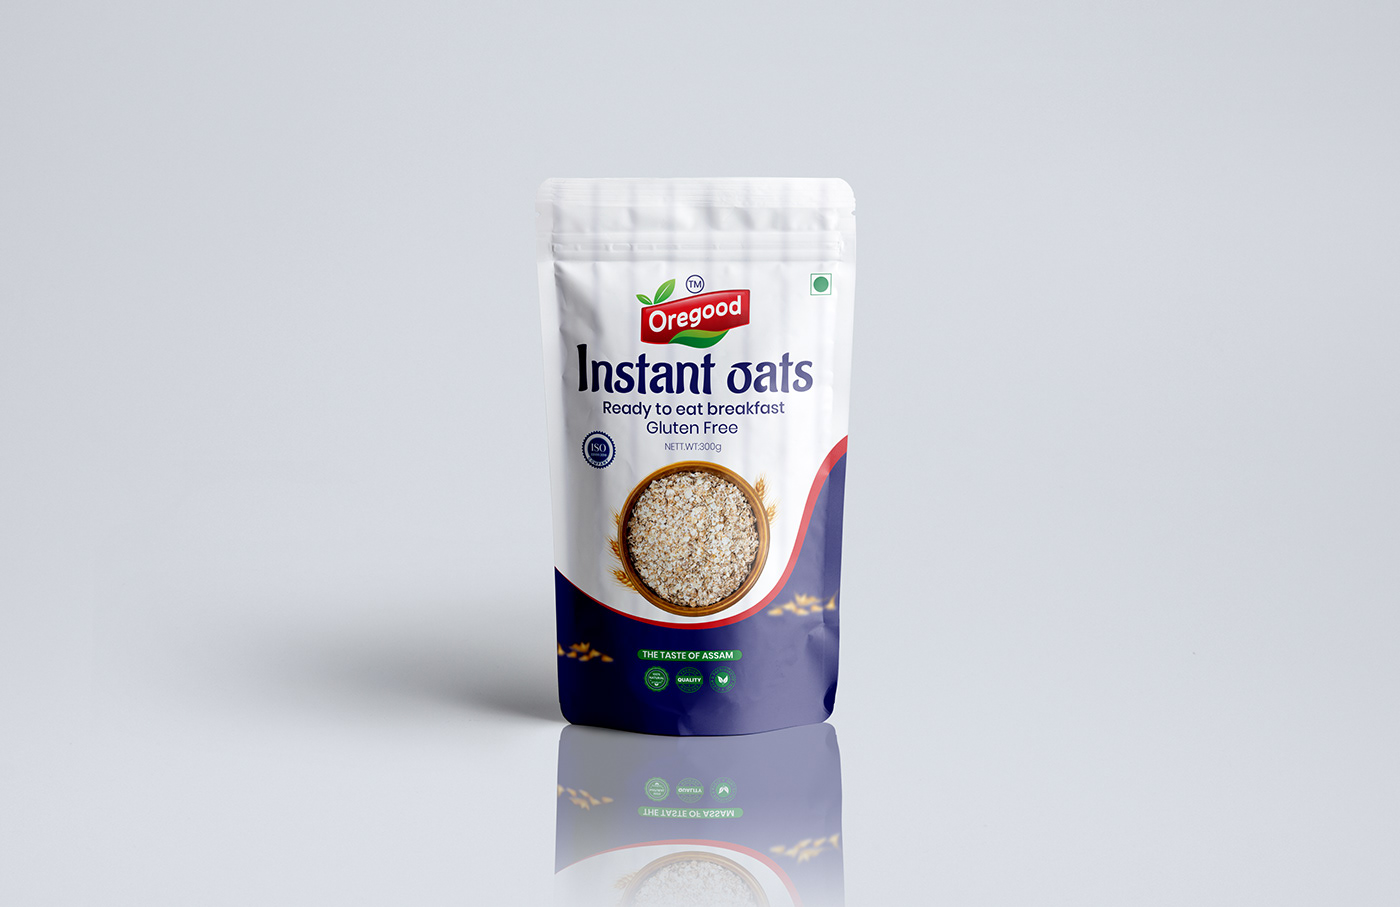 Pouch Packaging package design  Instant Oats oats label design oats pouch packaging Pouch Packaging Design rolled oats